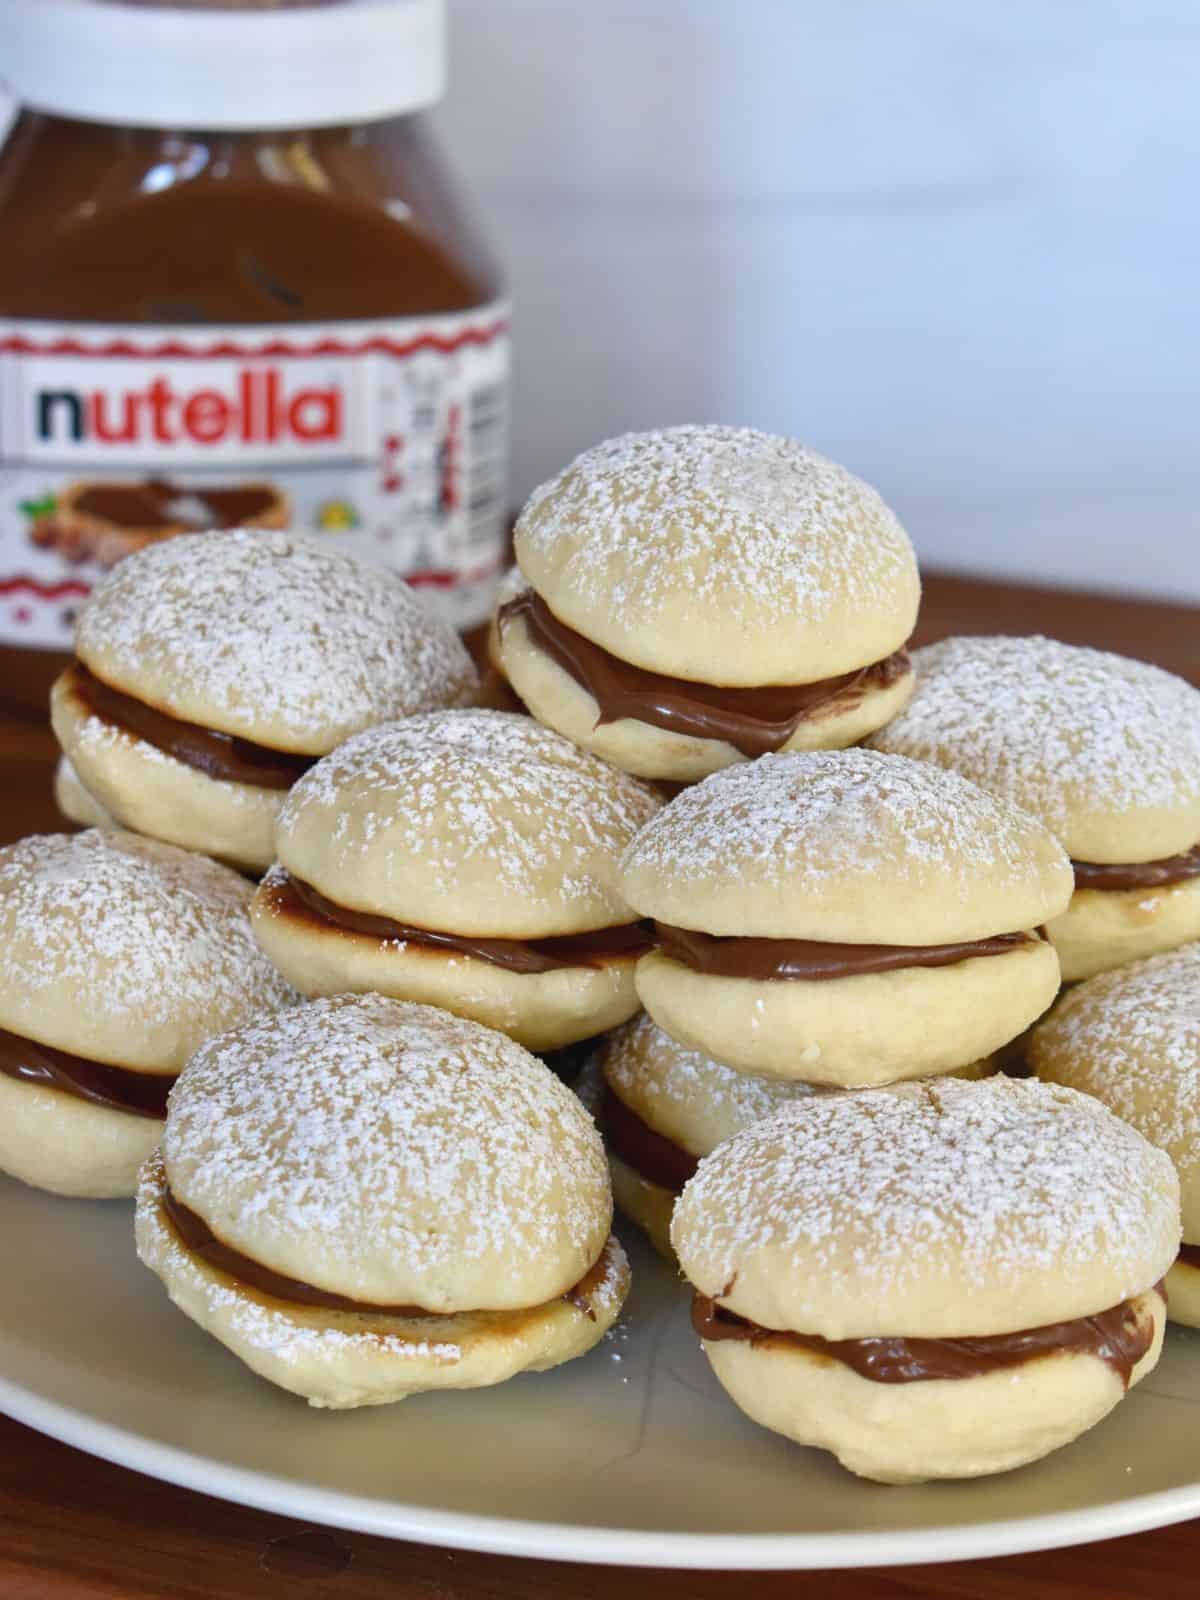 Nutella sandwich cookies made with soft ricotta cookies.